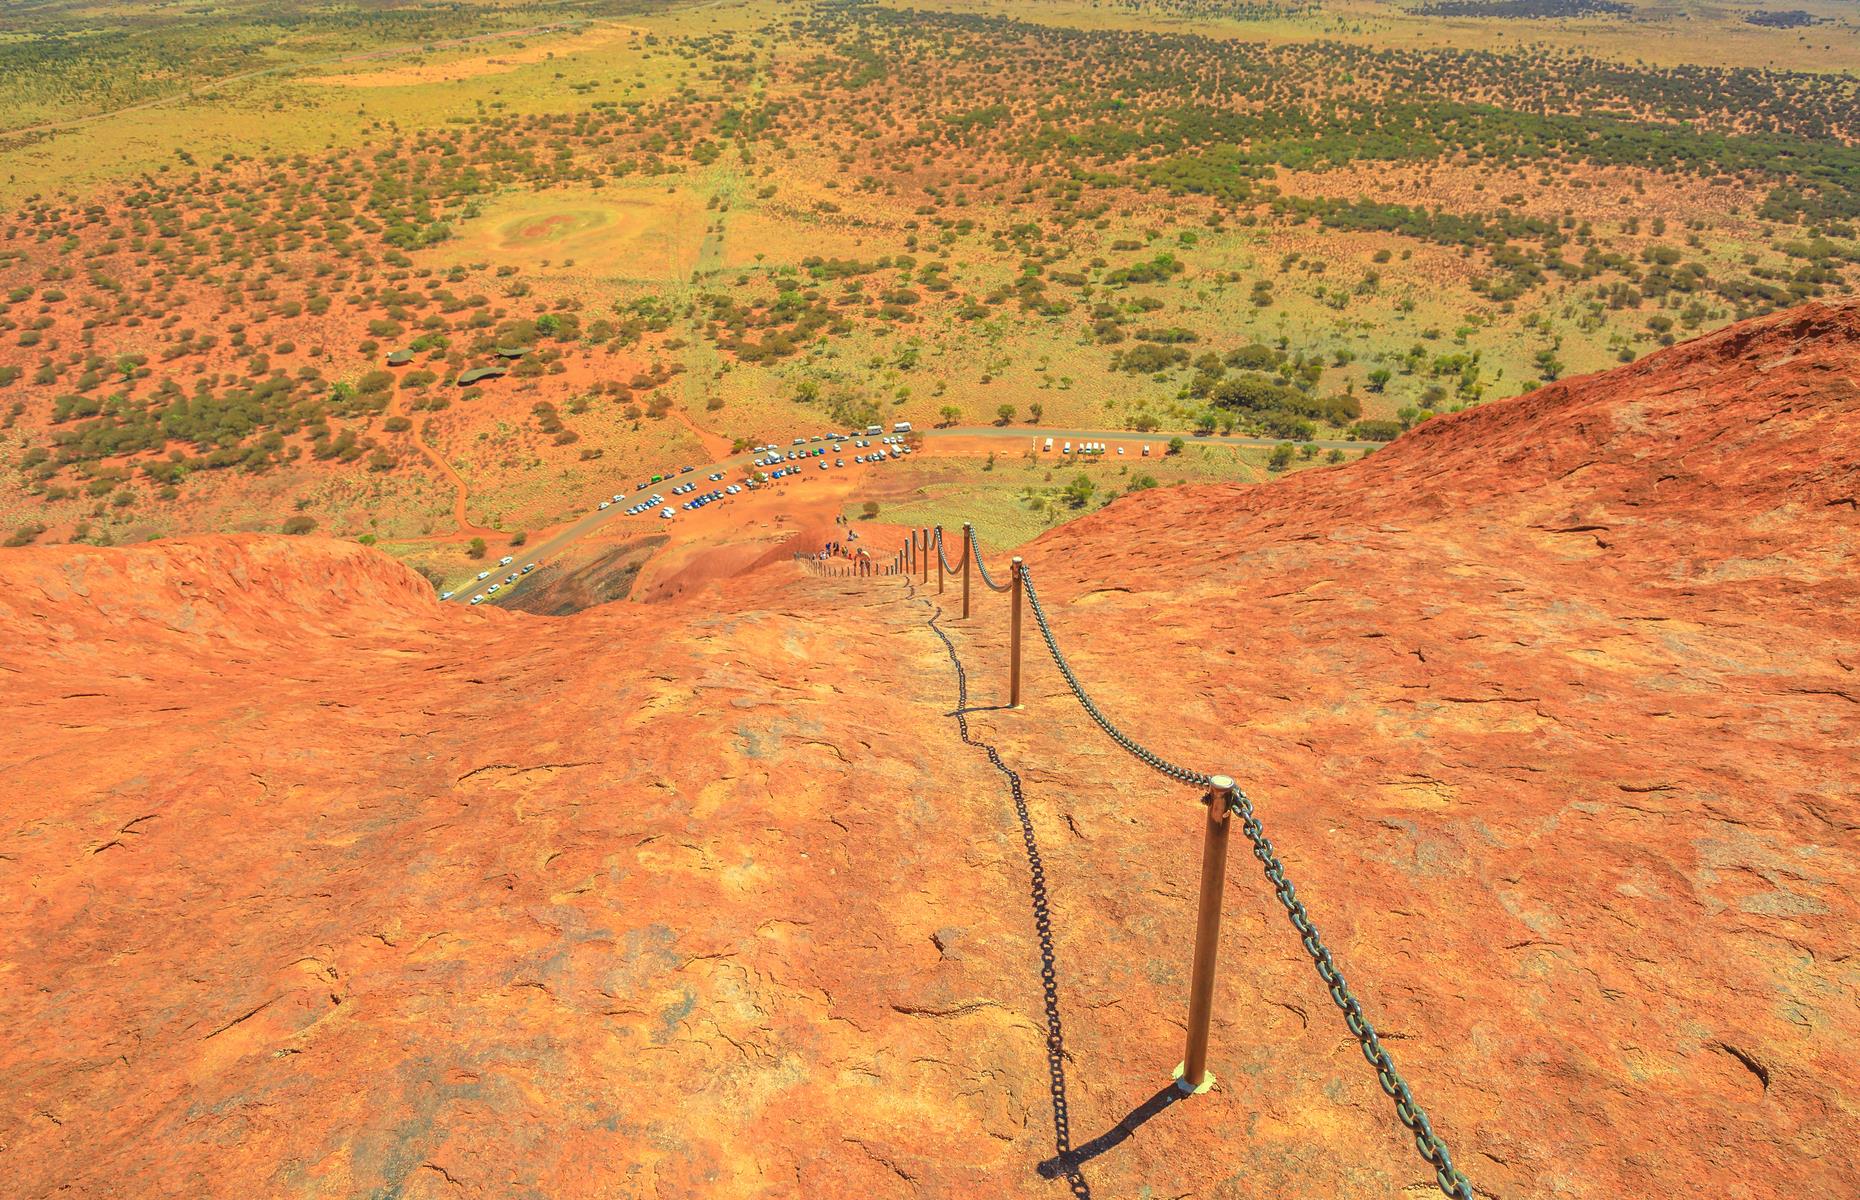 <p>Just before the ban came into effect hundreds of tourists scrambled to scale the sacred monolith for a final time. The climb to the summit of Uluru – which stands 1,142 feet (348m) high – is steep and slippery and has resulted in at least <a href="https://www.cbsnews.com/news/uluru-climb-australia-last-time-today-before-climbing-ban-comes-into-effect-2019-10-25/">37 fatalities</a>. Now visitors to the Red Centre will have to content themselves with a walk around the mighty rock’s remarkable circumference. </p>